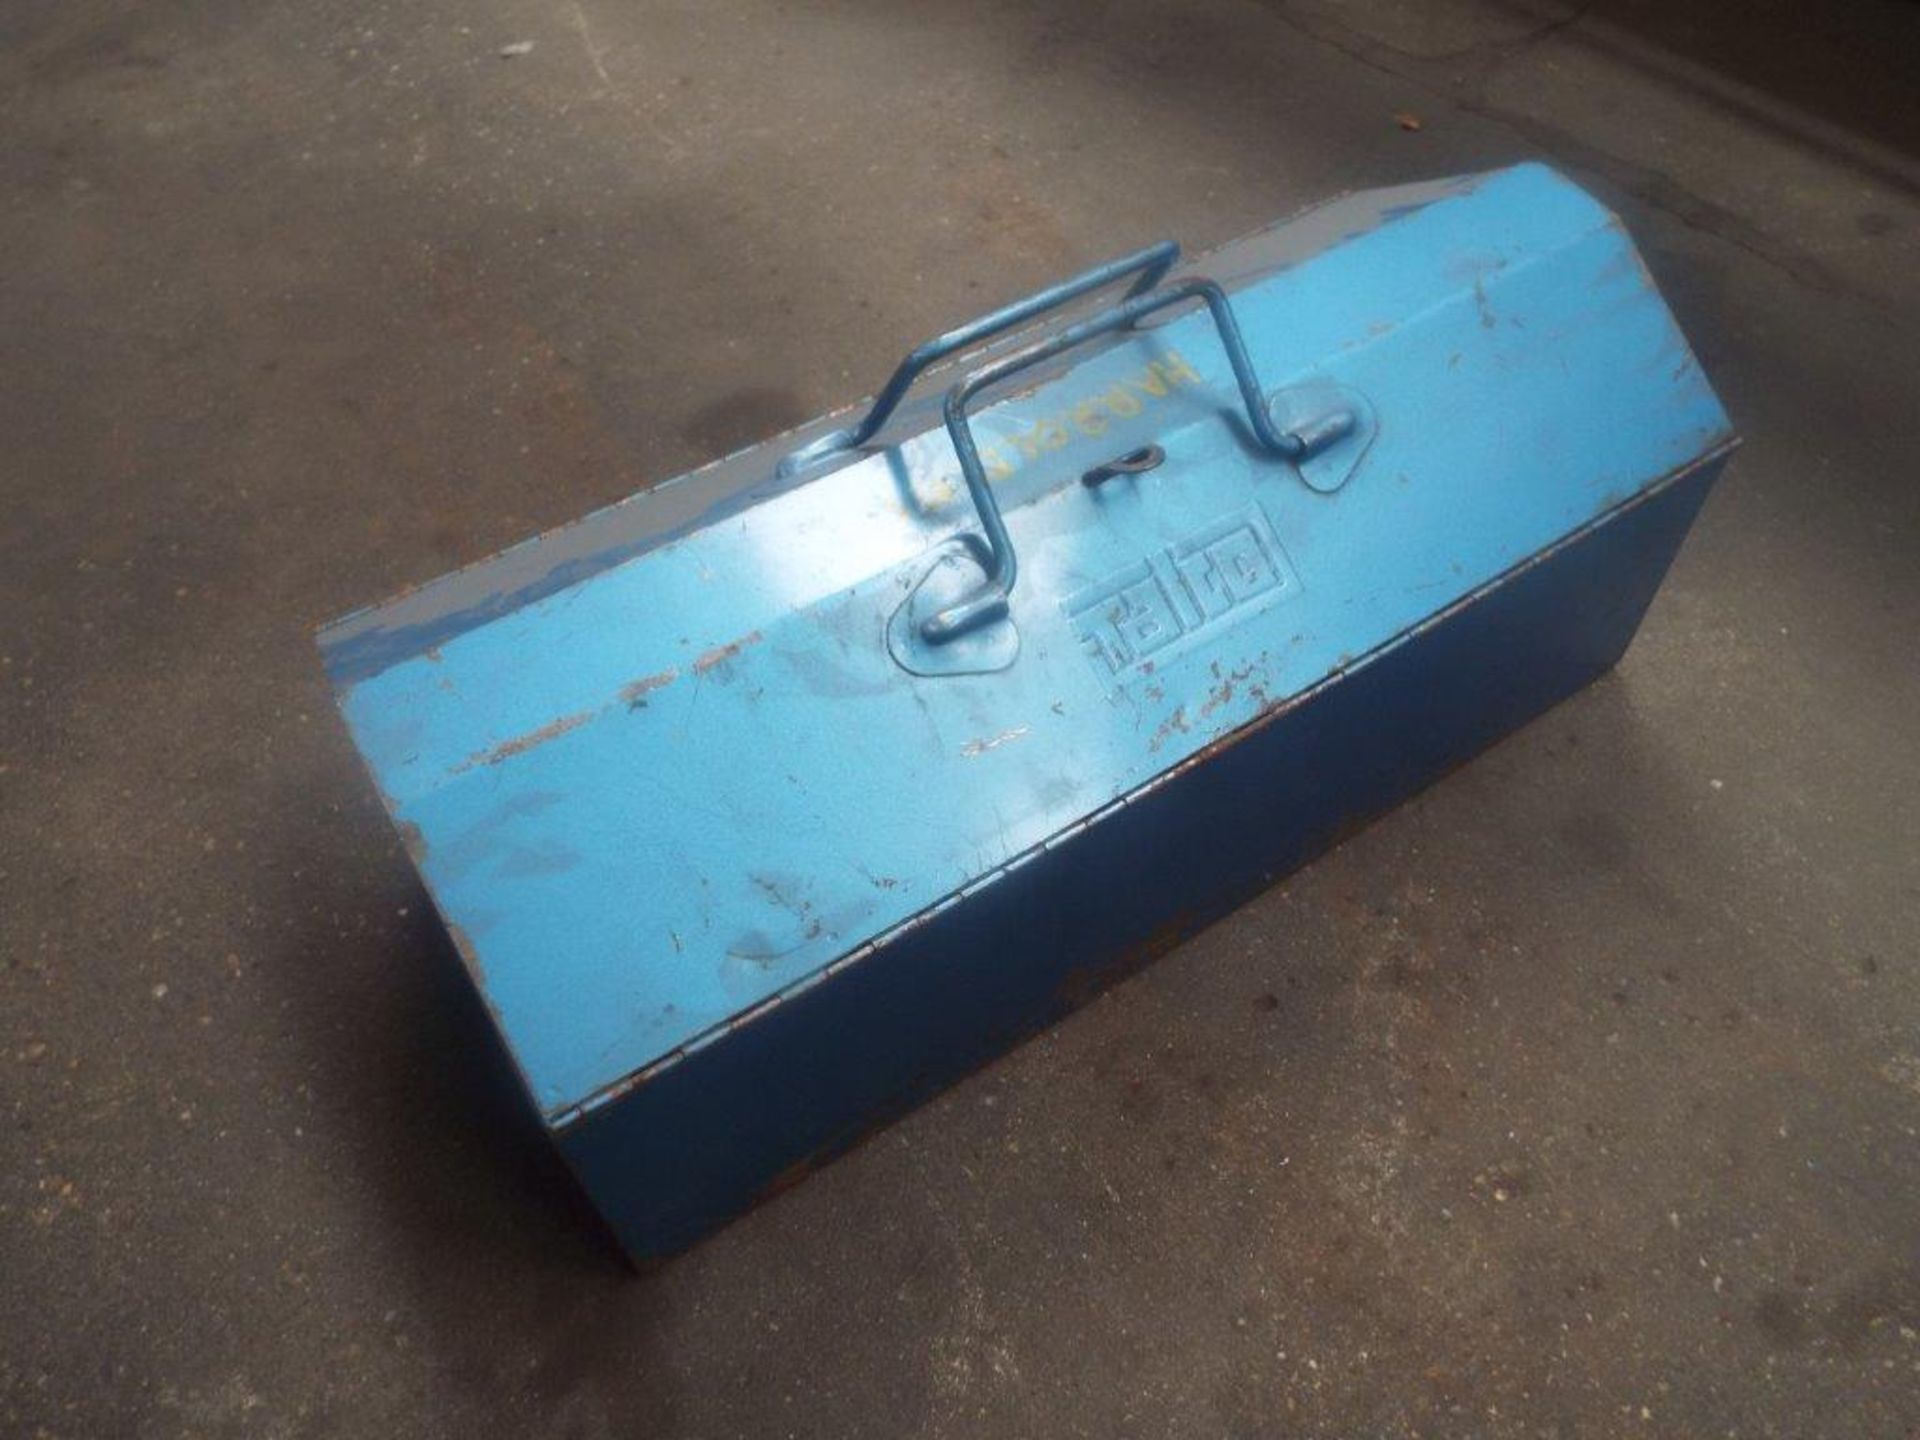 Talco Heavy Duty Steel Barn Door Tool Box Complete with a Selection of Tools - Image 5 of 6